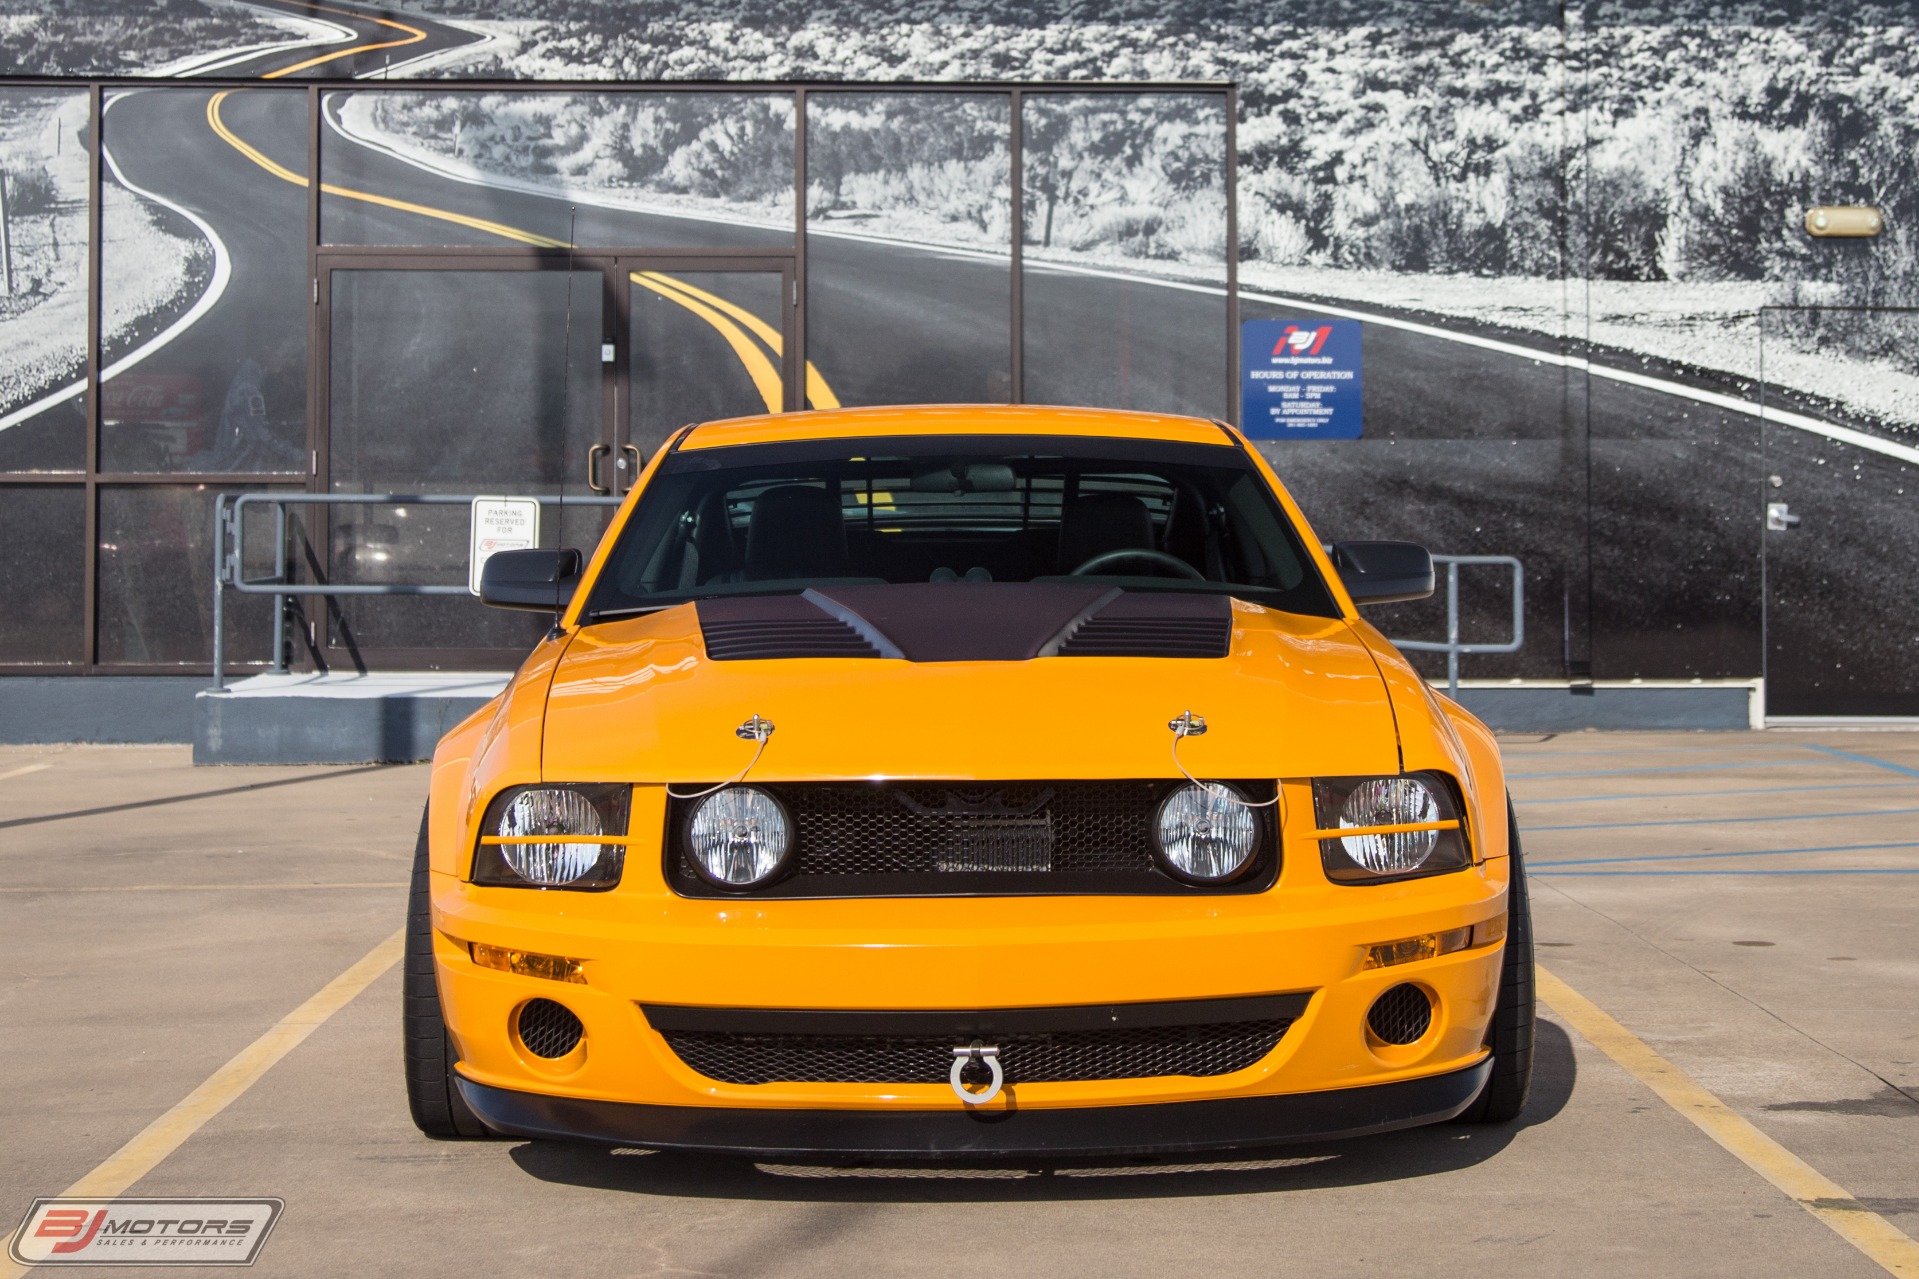 Used-2007-Ford-Mustang-Parnelli-Jones-with-Aluminator-XS-Crate-Engine-Track-Setup